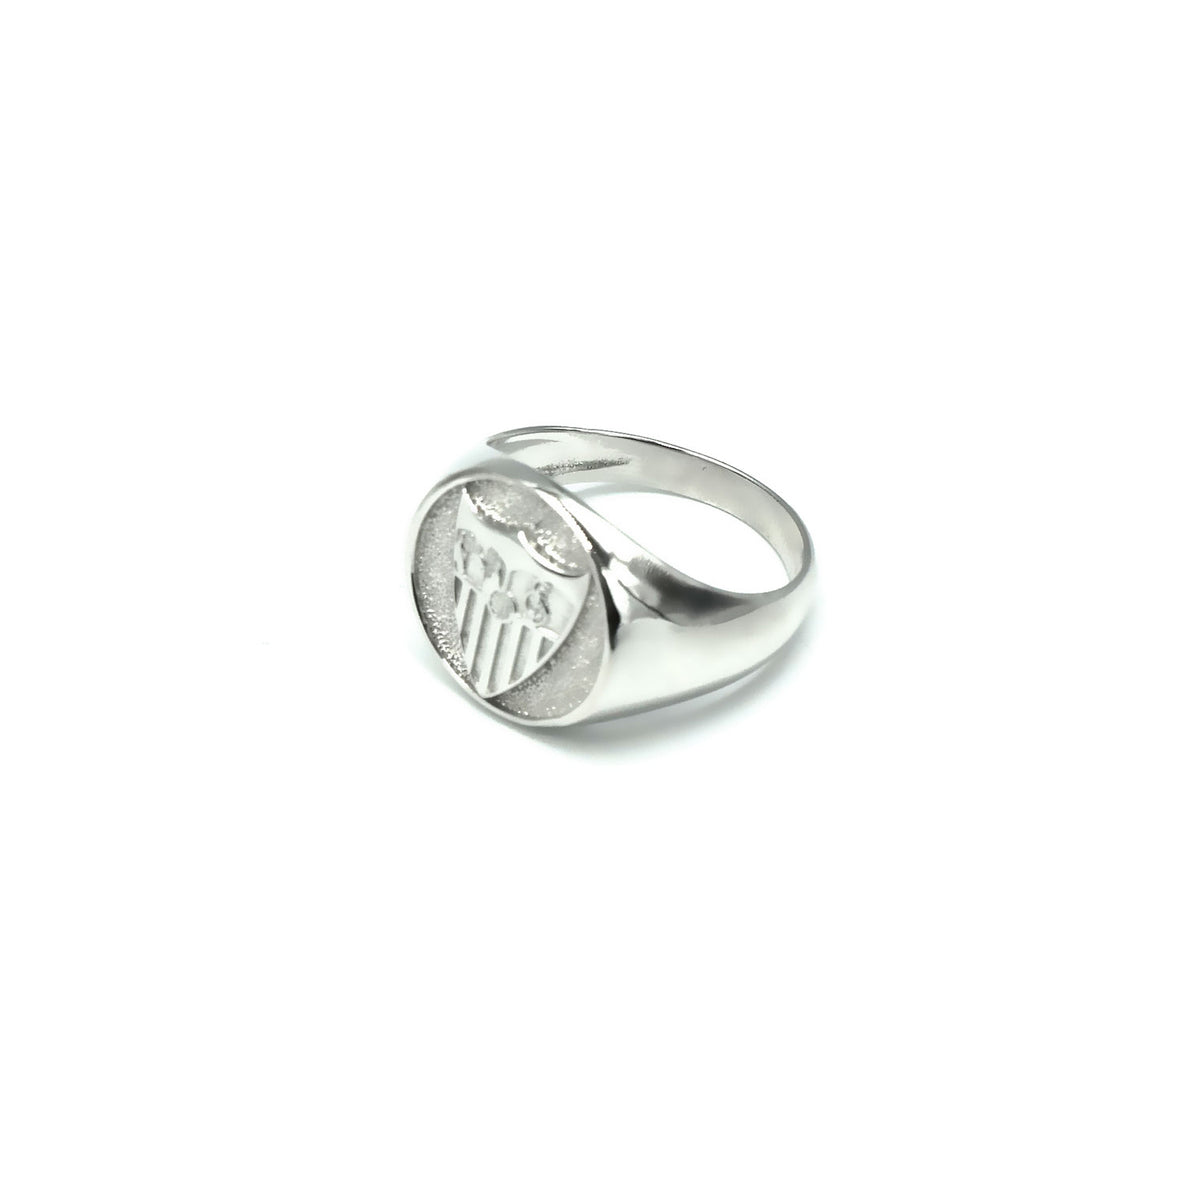 Silver Seal Ring with Crest